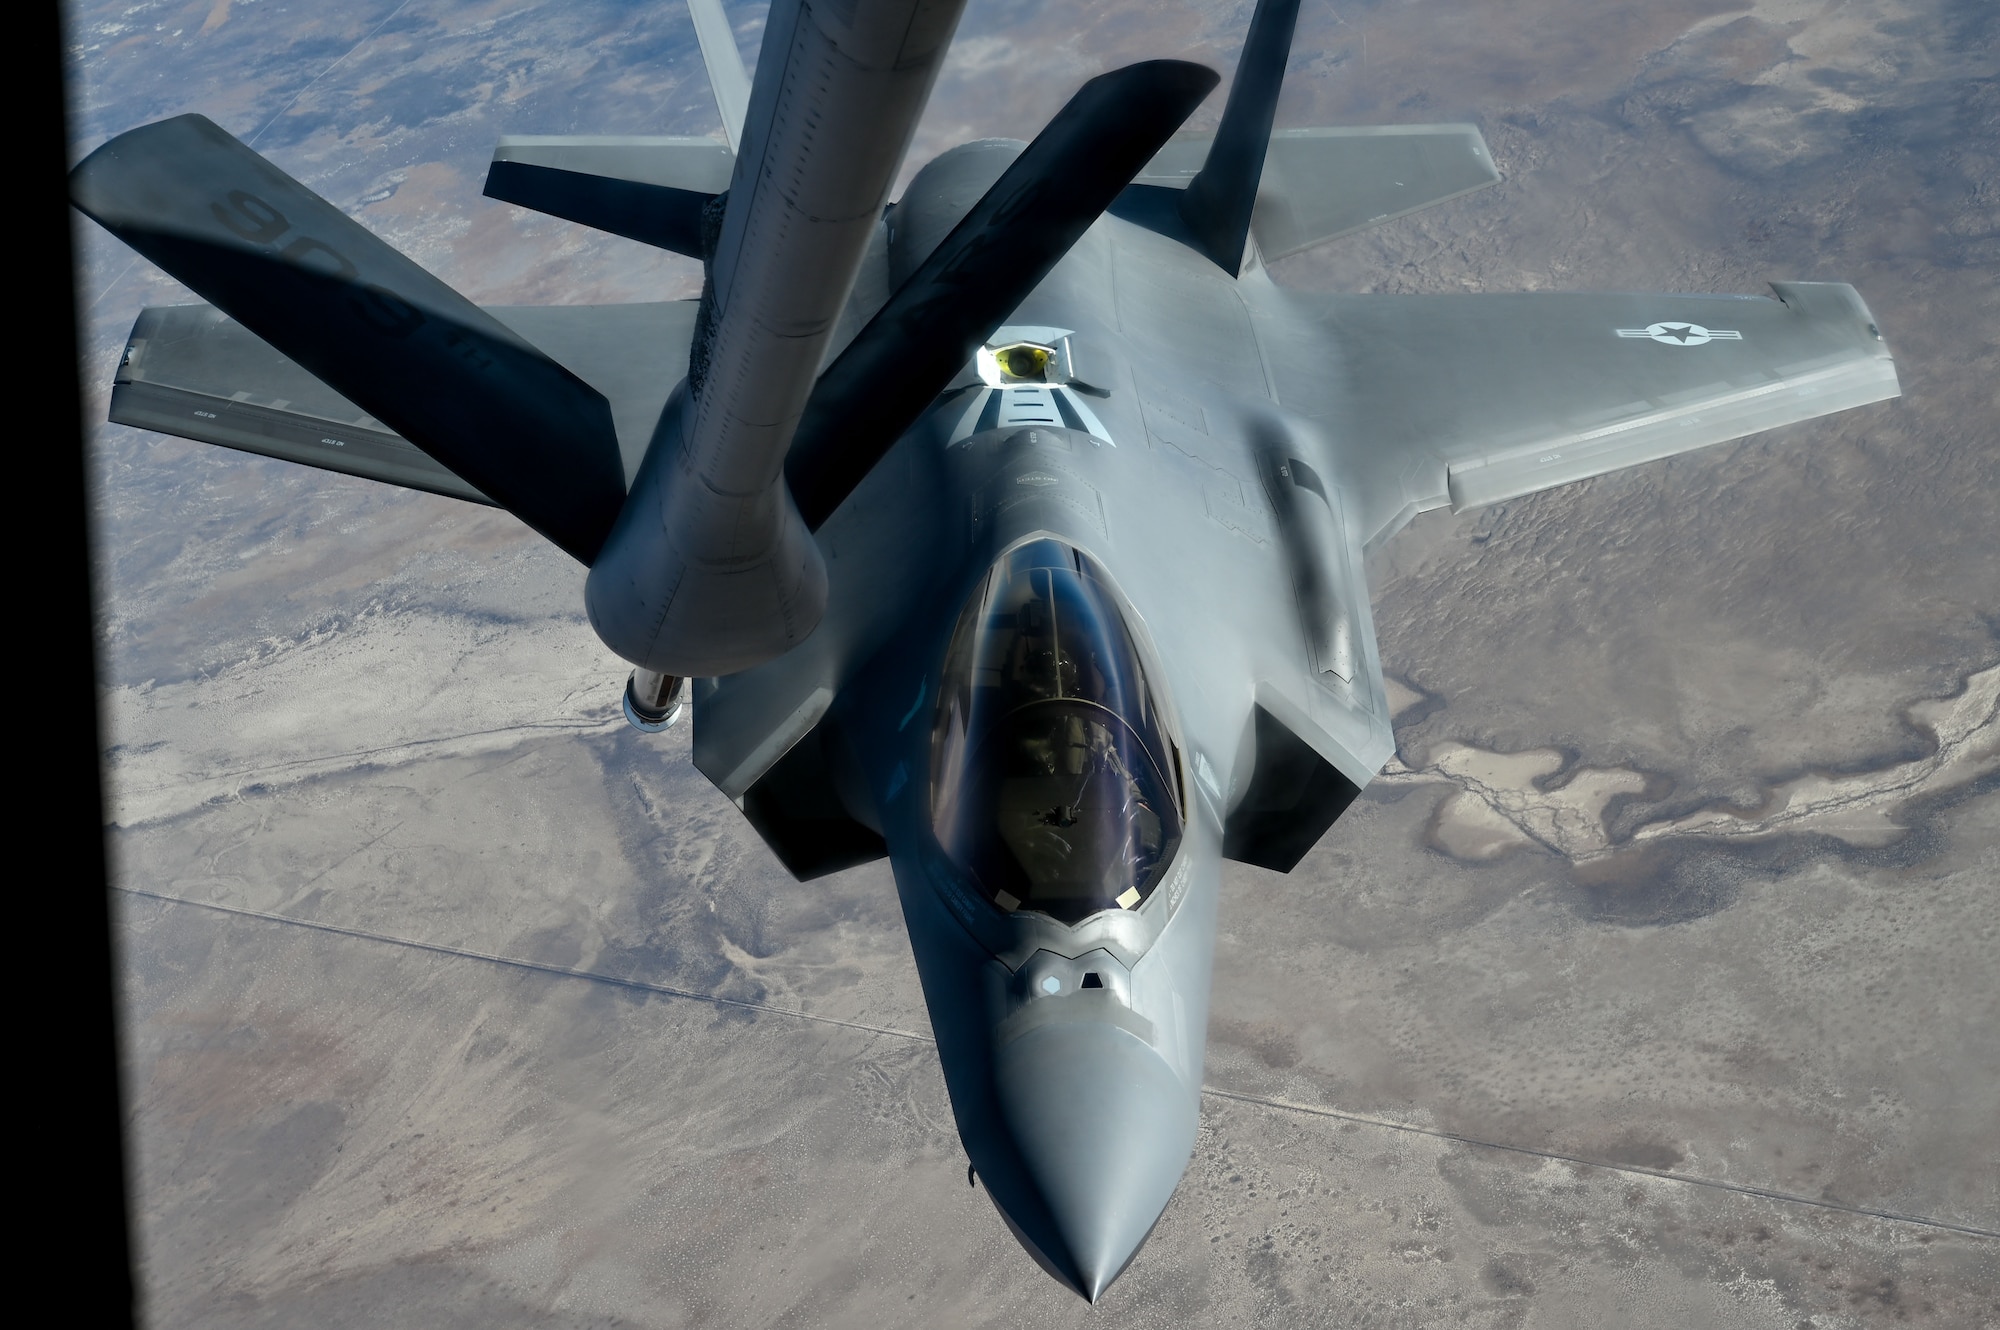 An F-35A Lightning II approaches to receive fuel from a KC-135 Stratotankers assigned to the 92nd Air Refueling Wing during the Weapons Integration course over the Nevada Test and Training Range, Dec. 11, 2023. Air refueling crews assigned to the 92nd, 93rd and 97th Air Refueling Squadrons at Fairchild Air Force Base, Washington, participated in the WSINT course to enhance interoperability with a variety of aircraft and demonstrate how Air Mobility Command’s air refueling capabilities enhance global reach for all Department of Defense air operations. WSINT is a series of complex, large-force employment missions that serve as the capstone portion of Weapons School classes, which take place twice a year at Nellis Air Force Base, Nevada. WSINT students plan and execute every aspect of air, space and cyber combat operations, with joint force components converging over the Nevada Test and Training Range. (U.S. Air Force photo by Senior Airman Haiden Morris)